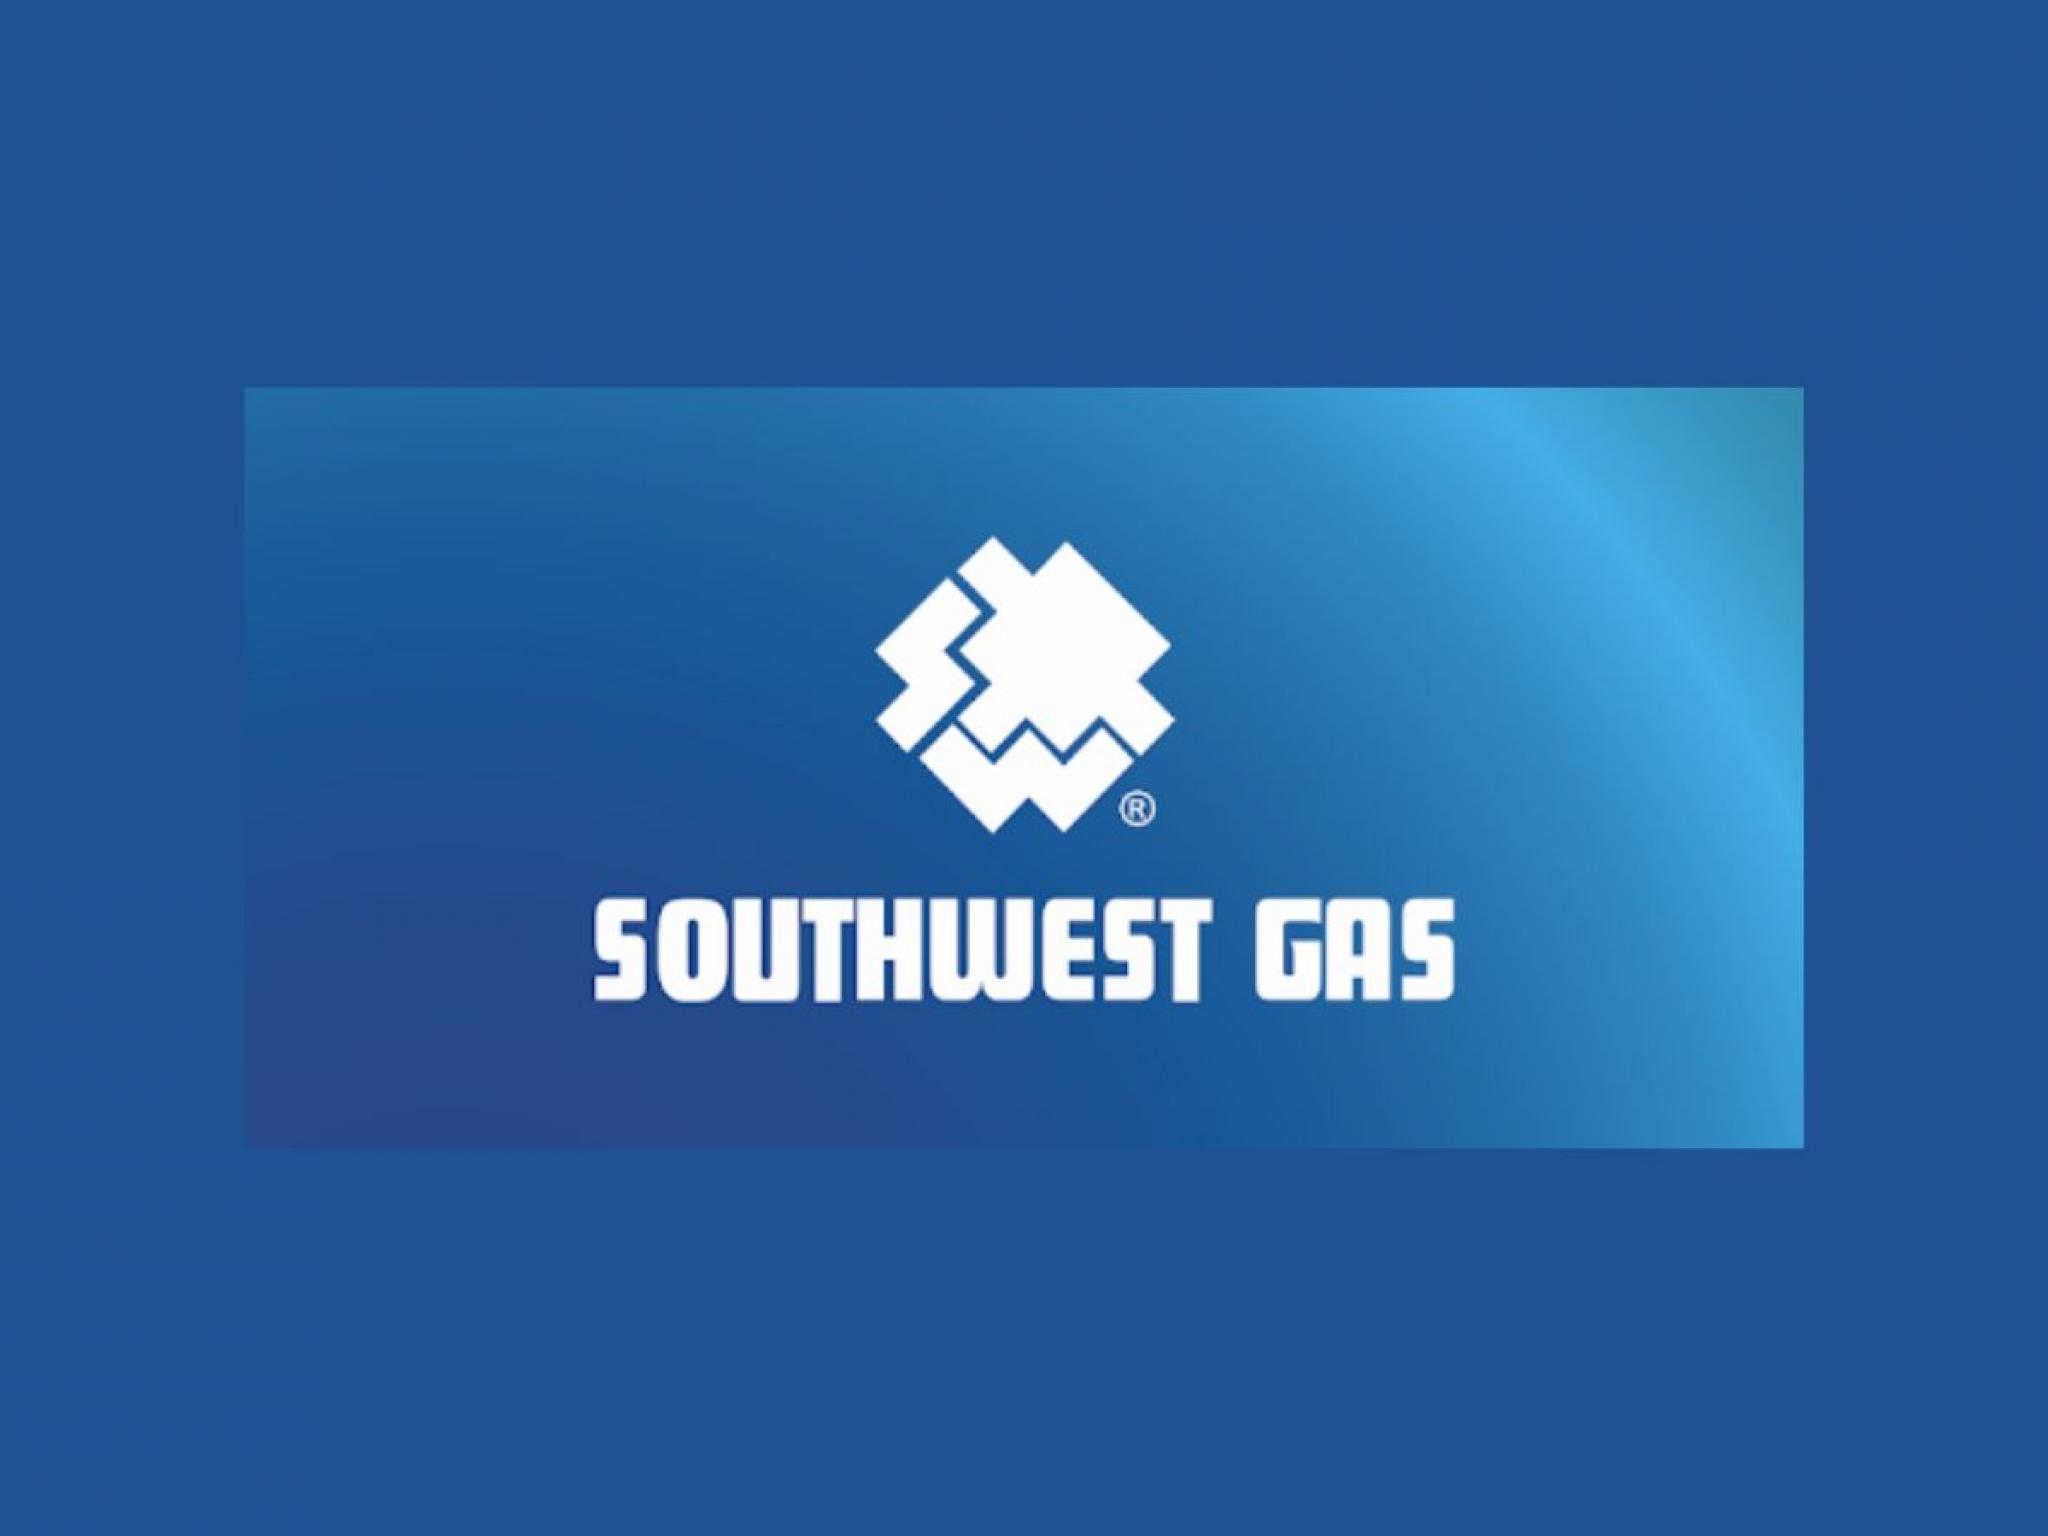  around-8m-bet-on-southwest-gas-holdings-check-out-these-4-stocks-insiders-are-buying 